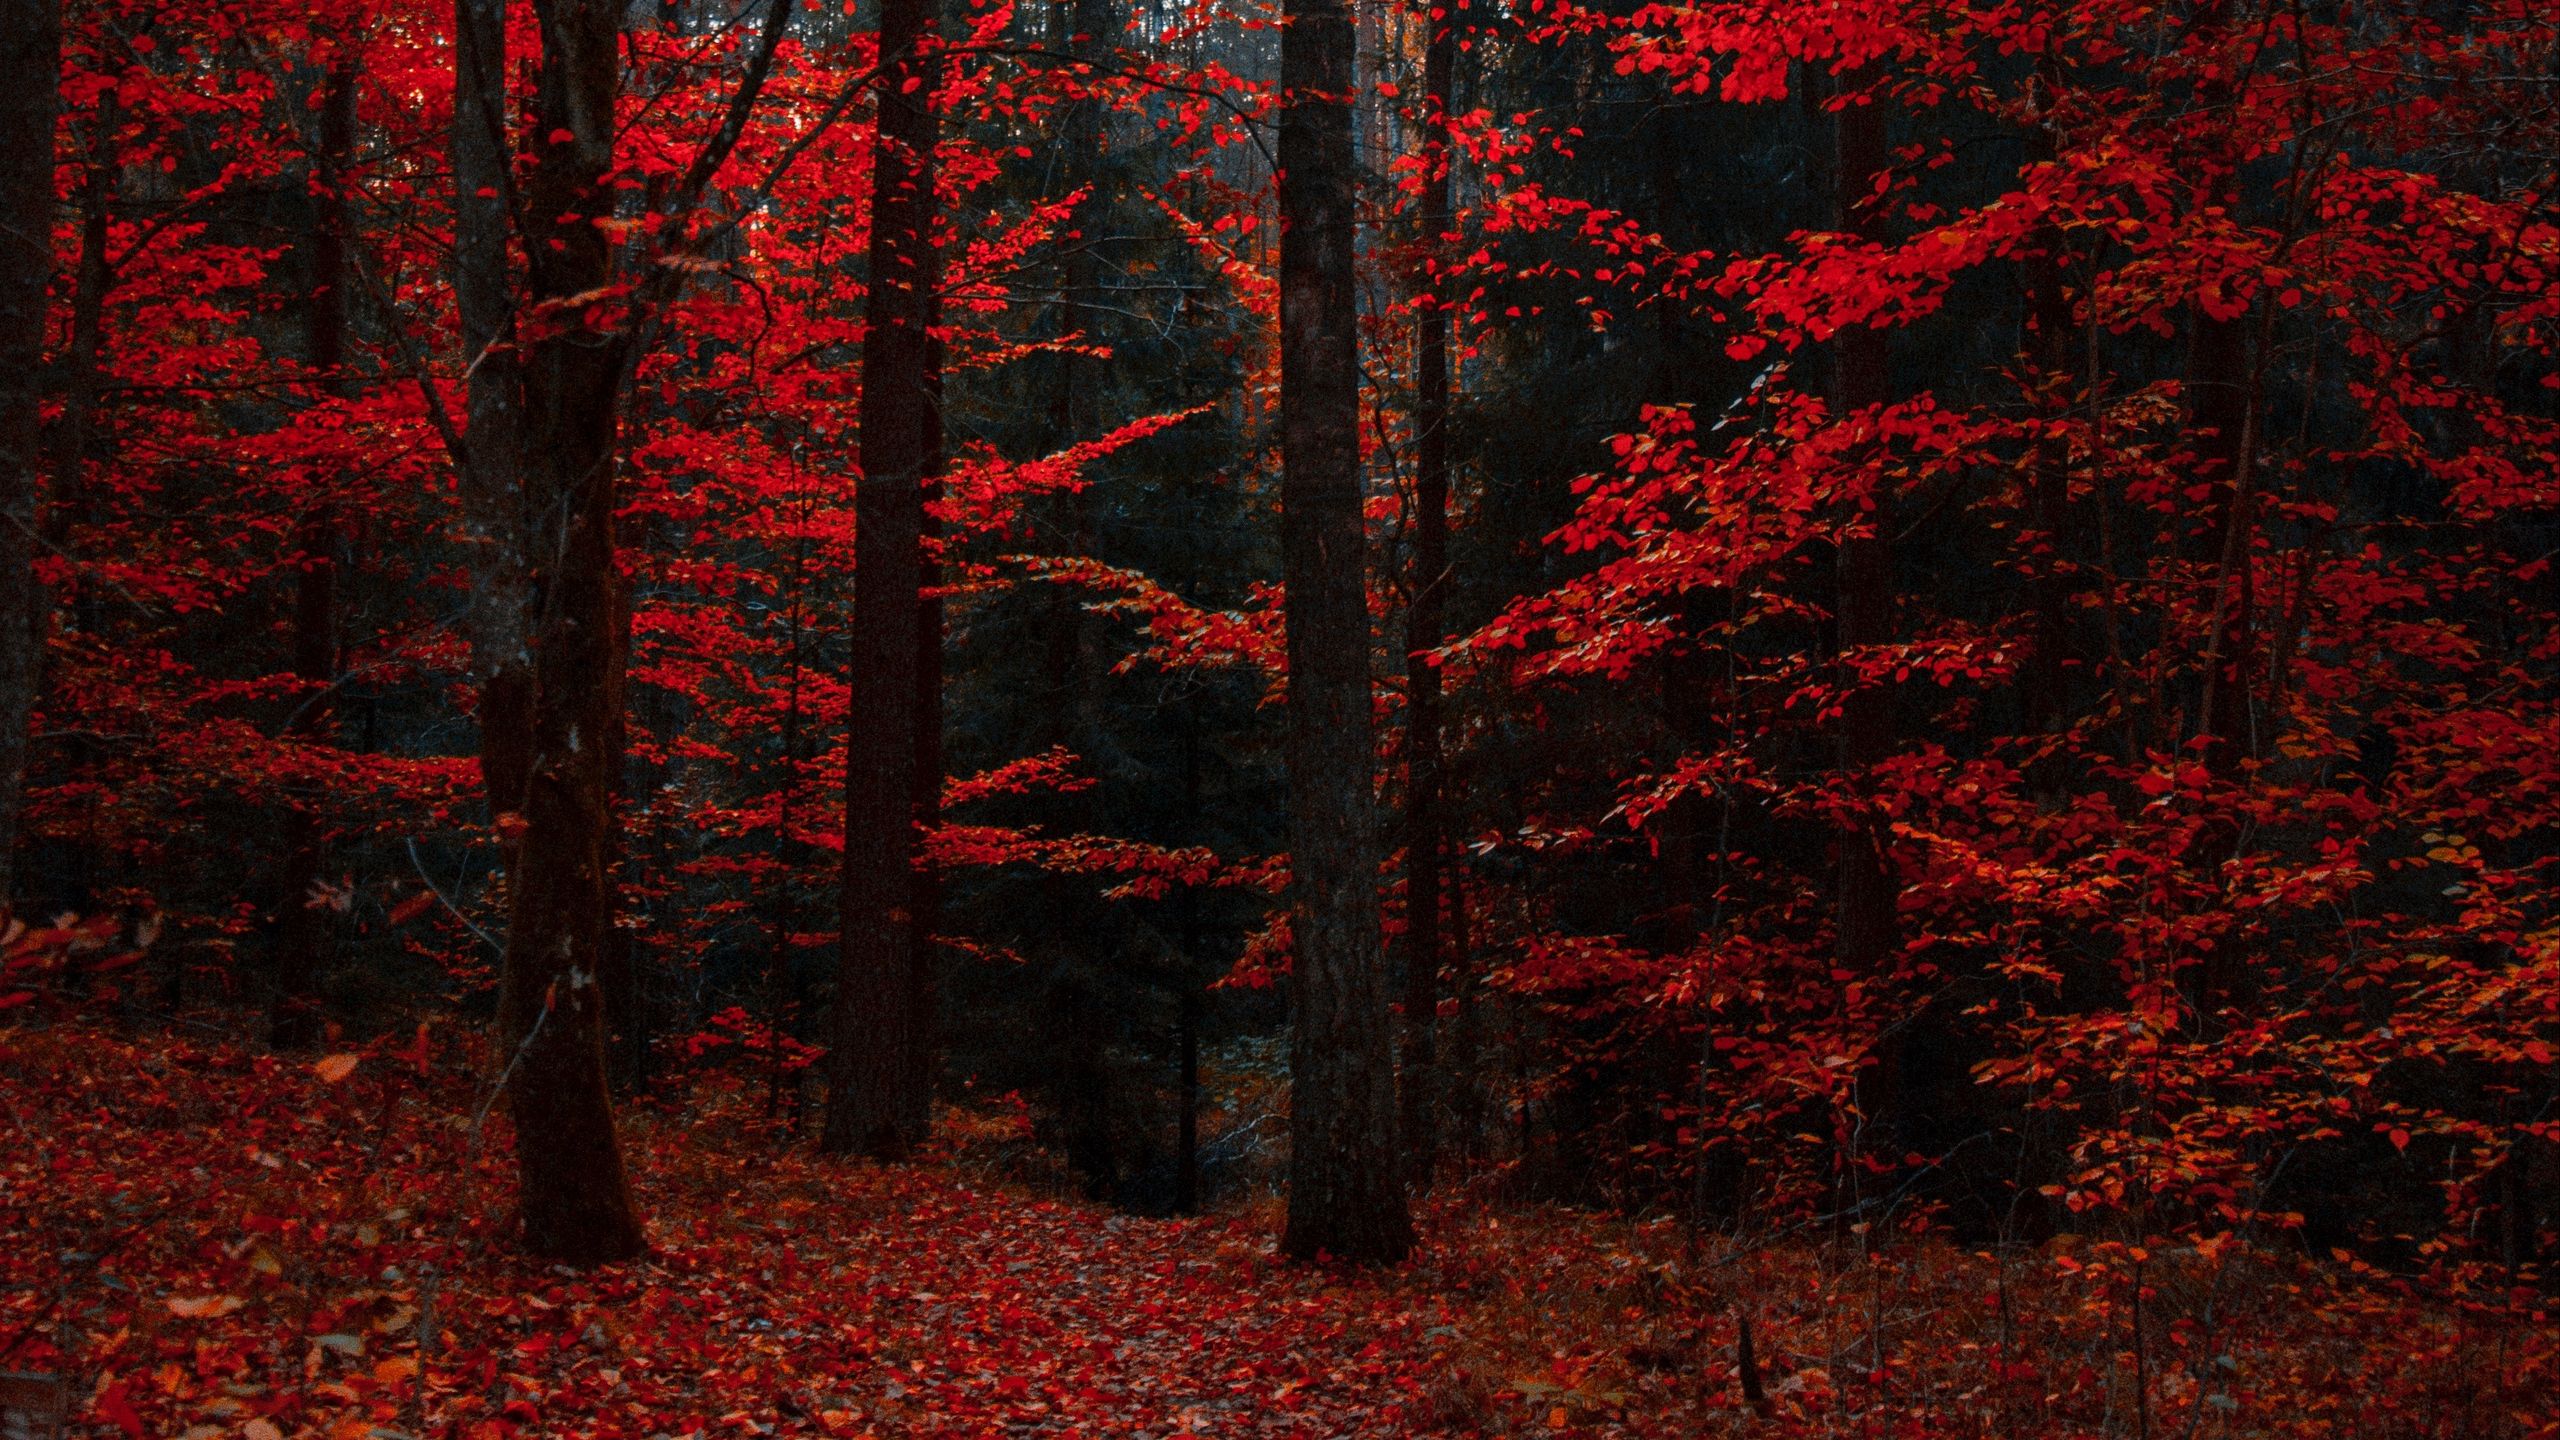 Download wallpaper 2560x1440 autumn, forest, trees, foliage